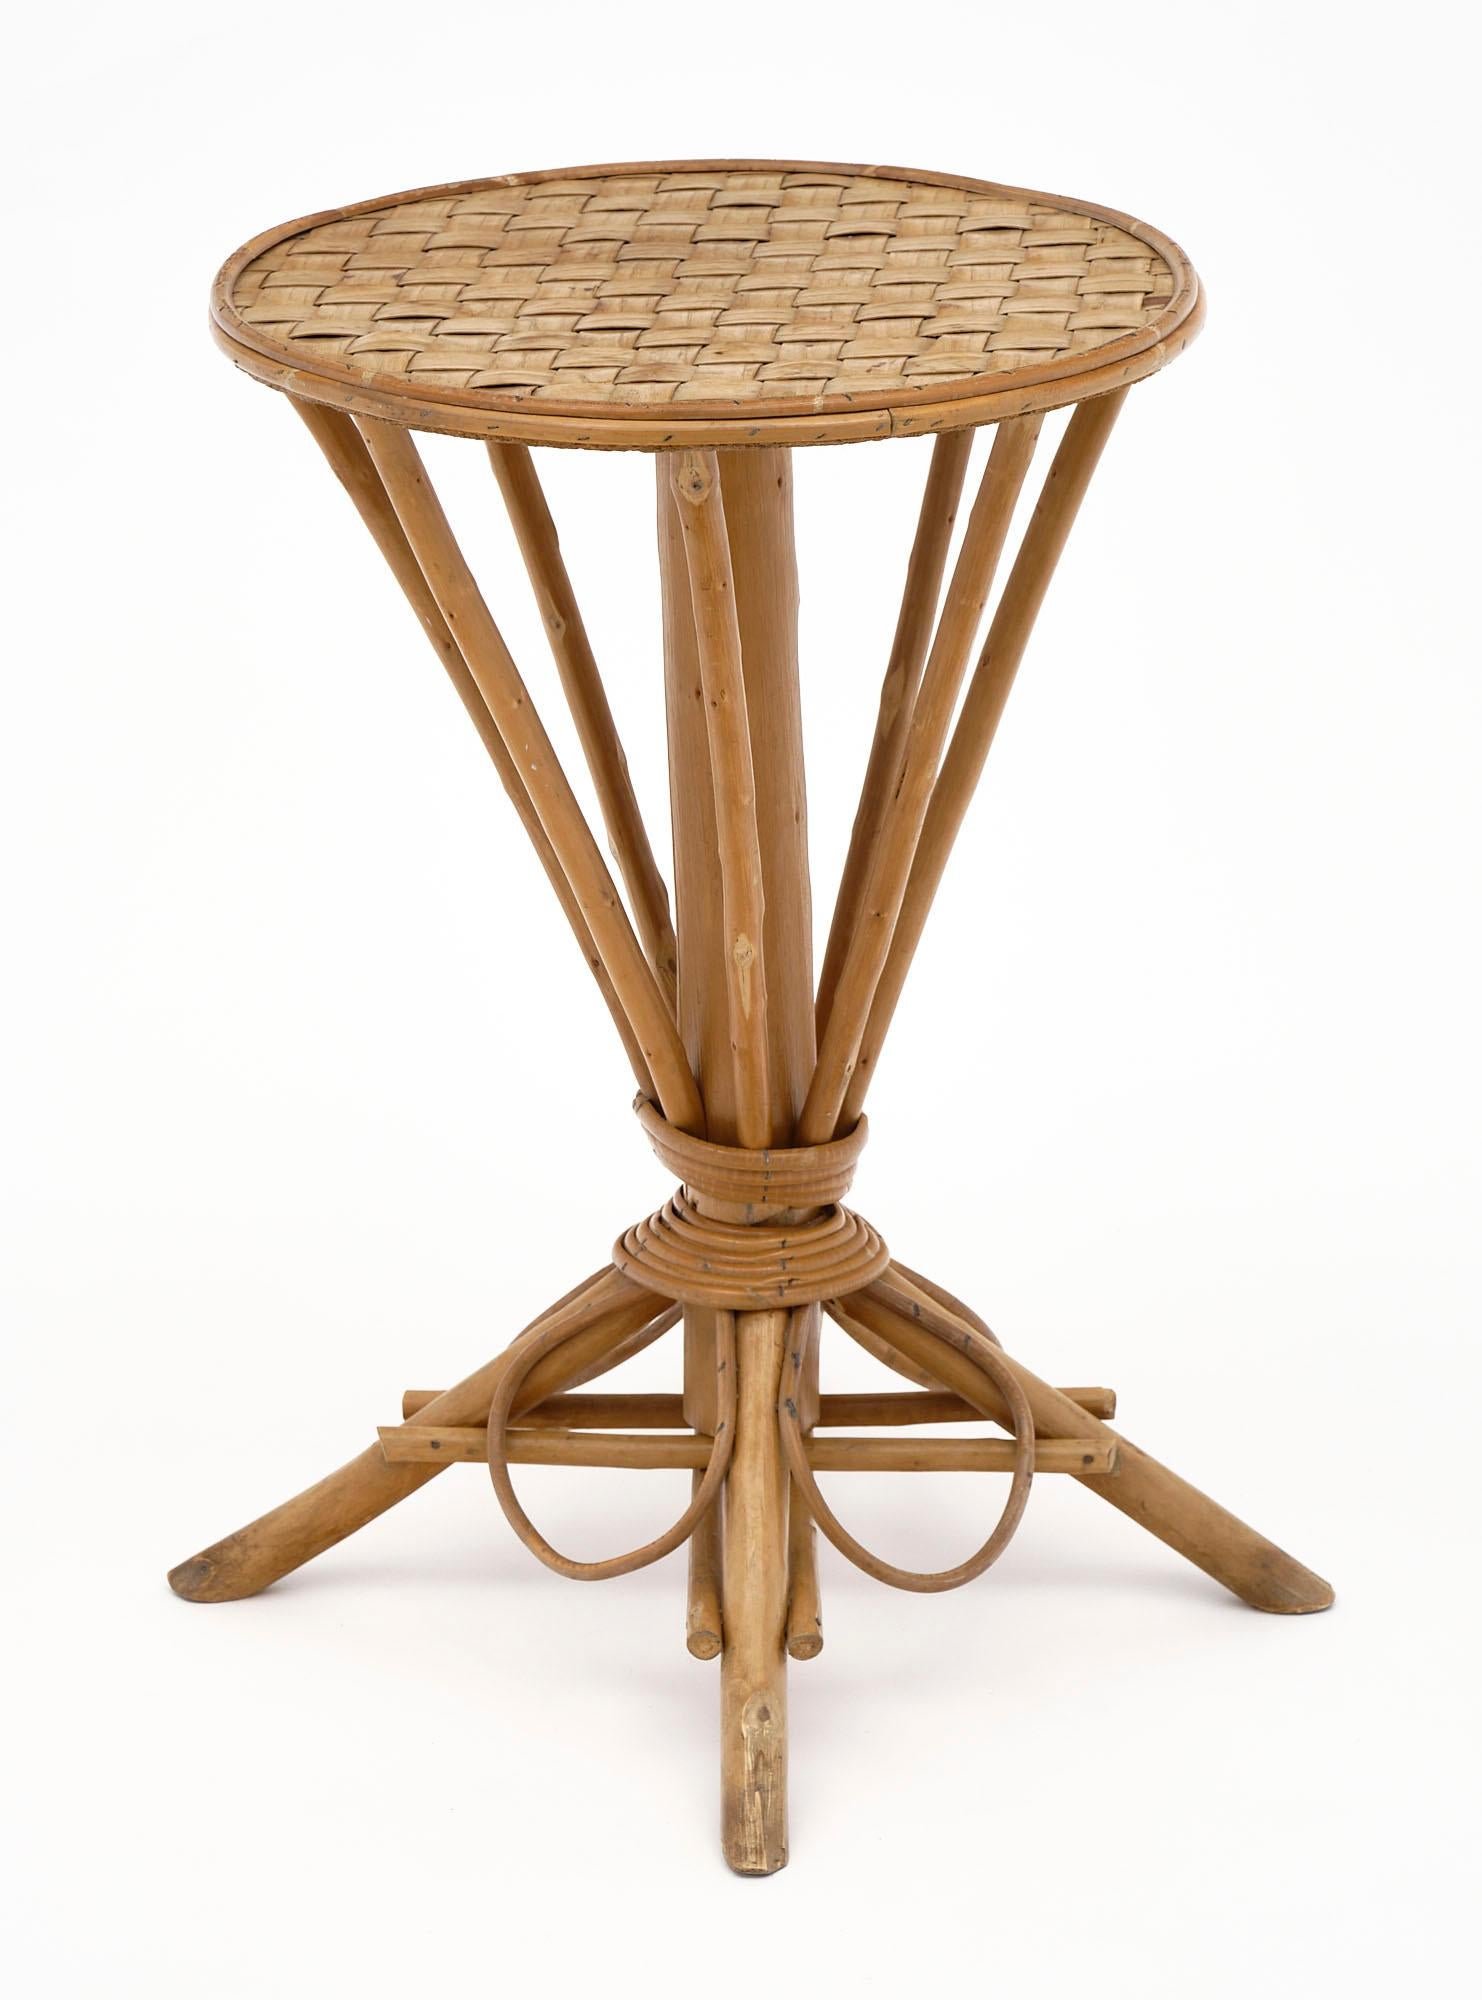 Side table from France made of wicker. The top is 19.25” in diameter.